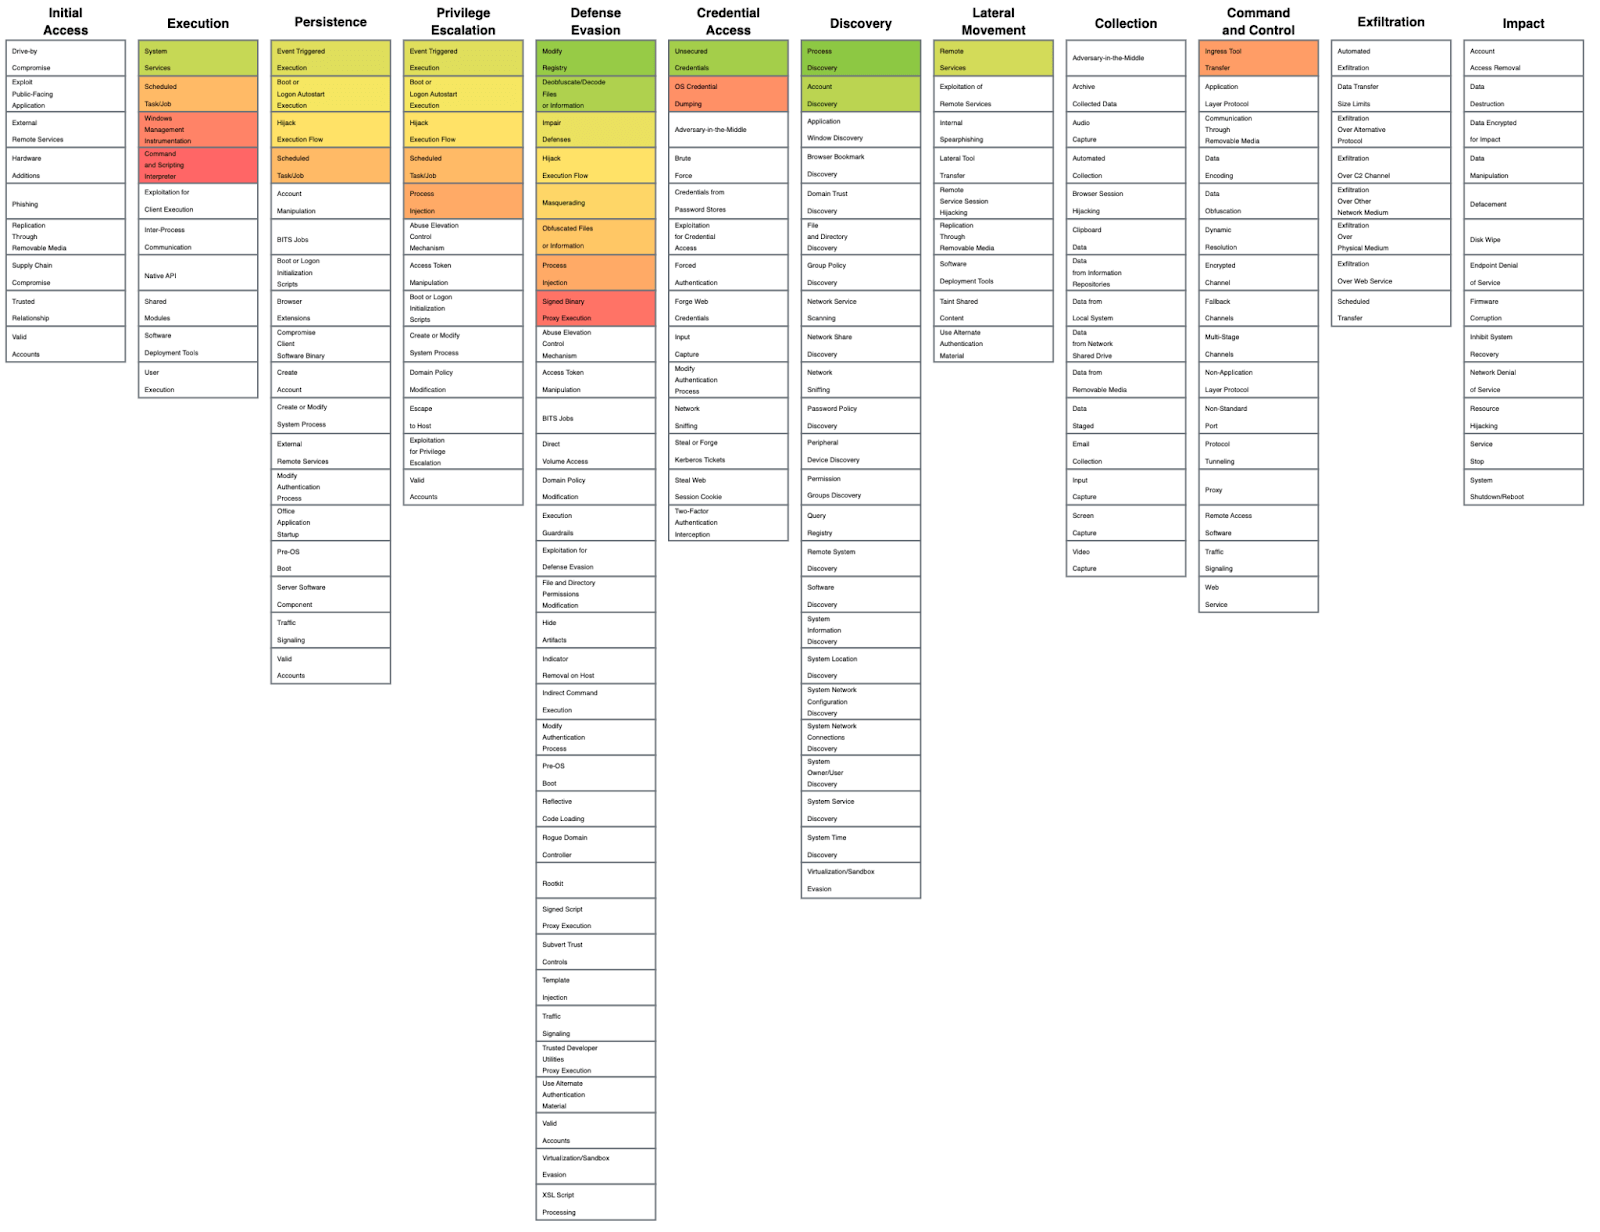 MITRE ATT&CK Navigator layer showing the 20 most prevalent ATT&CK techniques detected by Red Canary